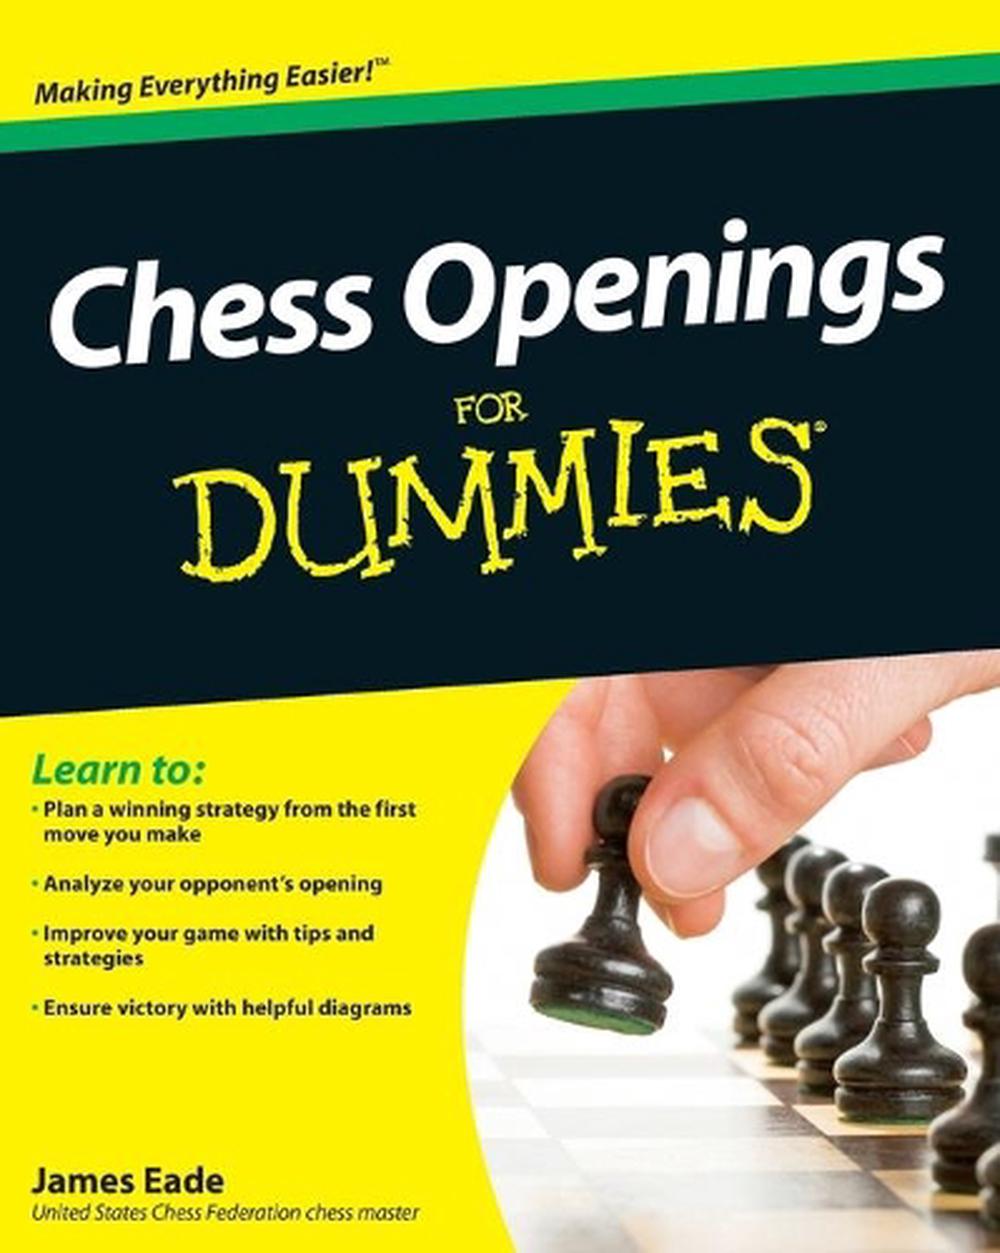 Shop Chess (Openings) Books and Collectibles